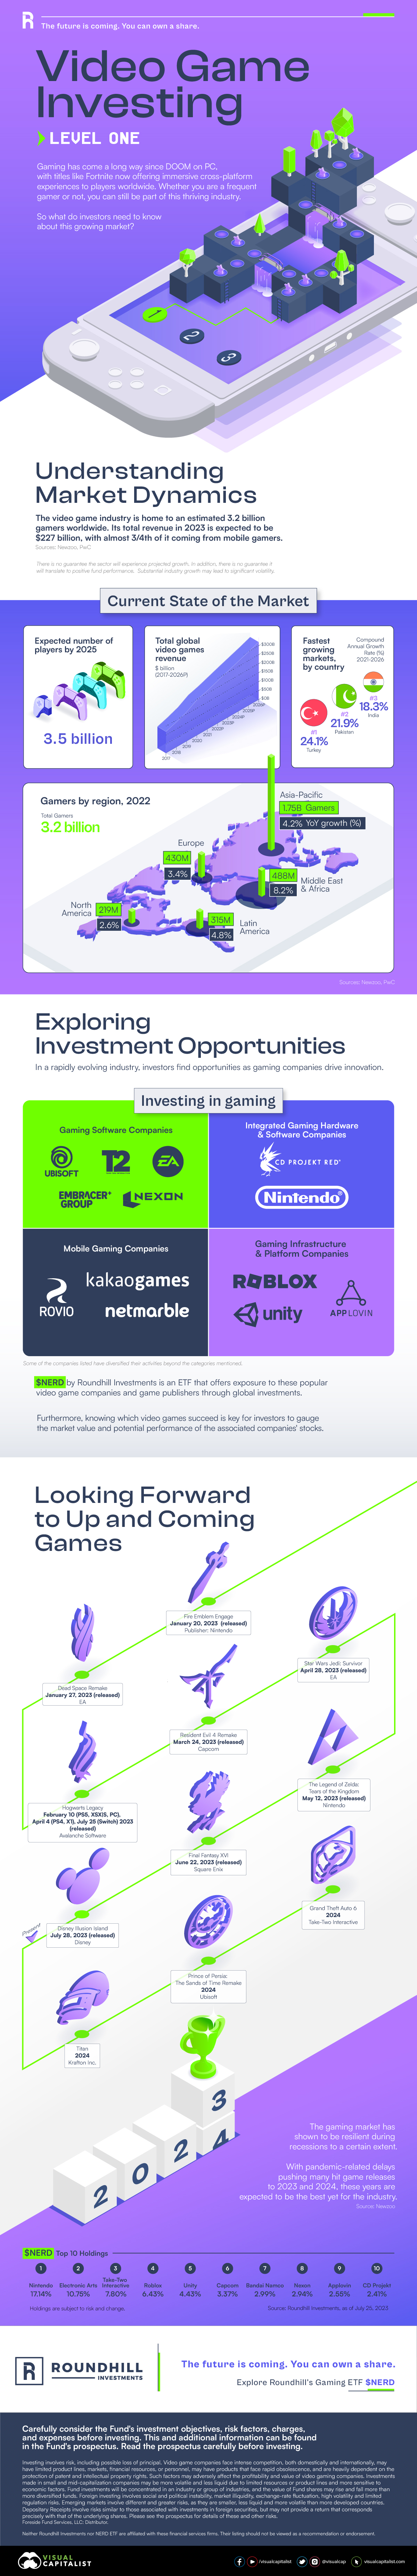 Media and Games Invests SE: Launch of big update in MGI's Top 1